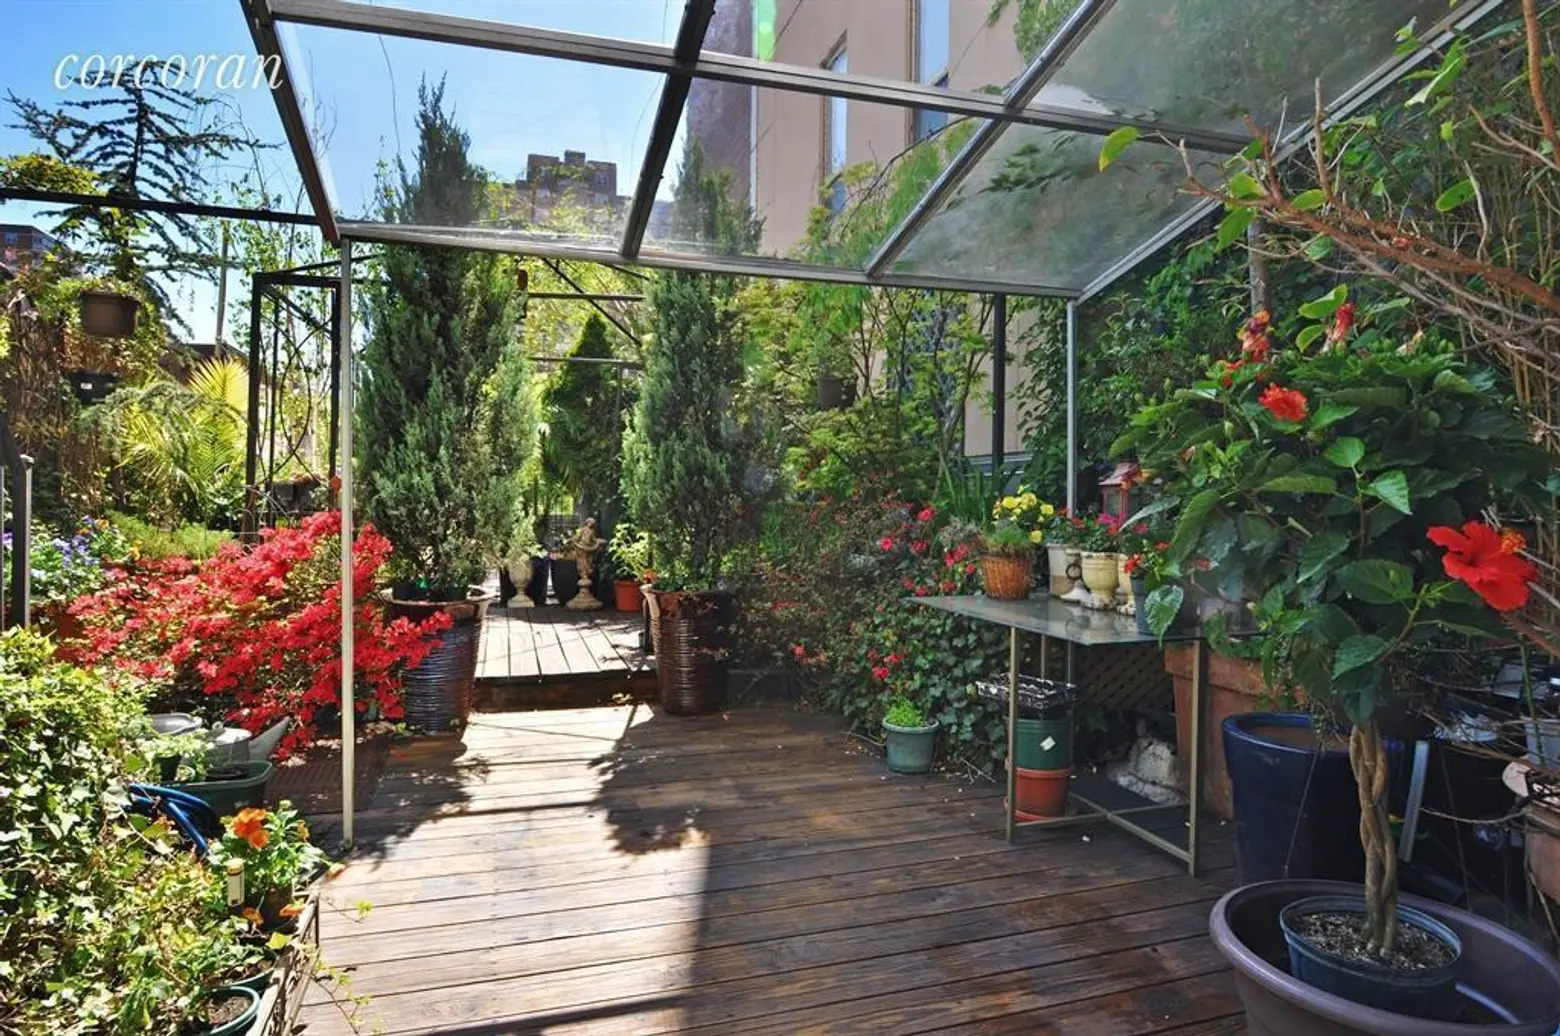 $1.3M West Side duplex with a greenhouse and a double-decker roof is a gardener’s dream